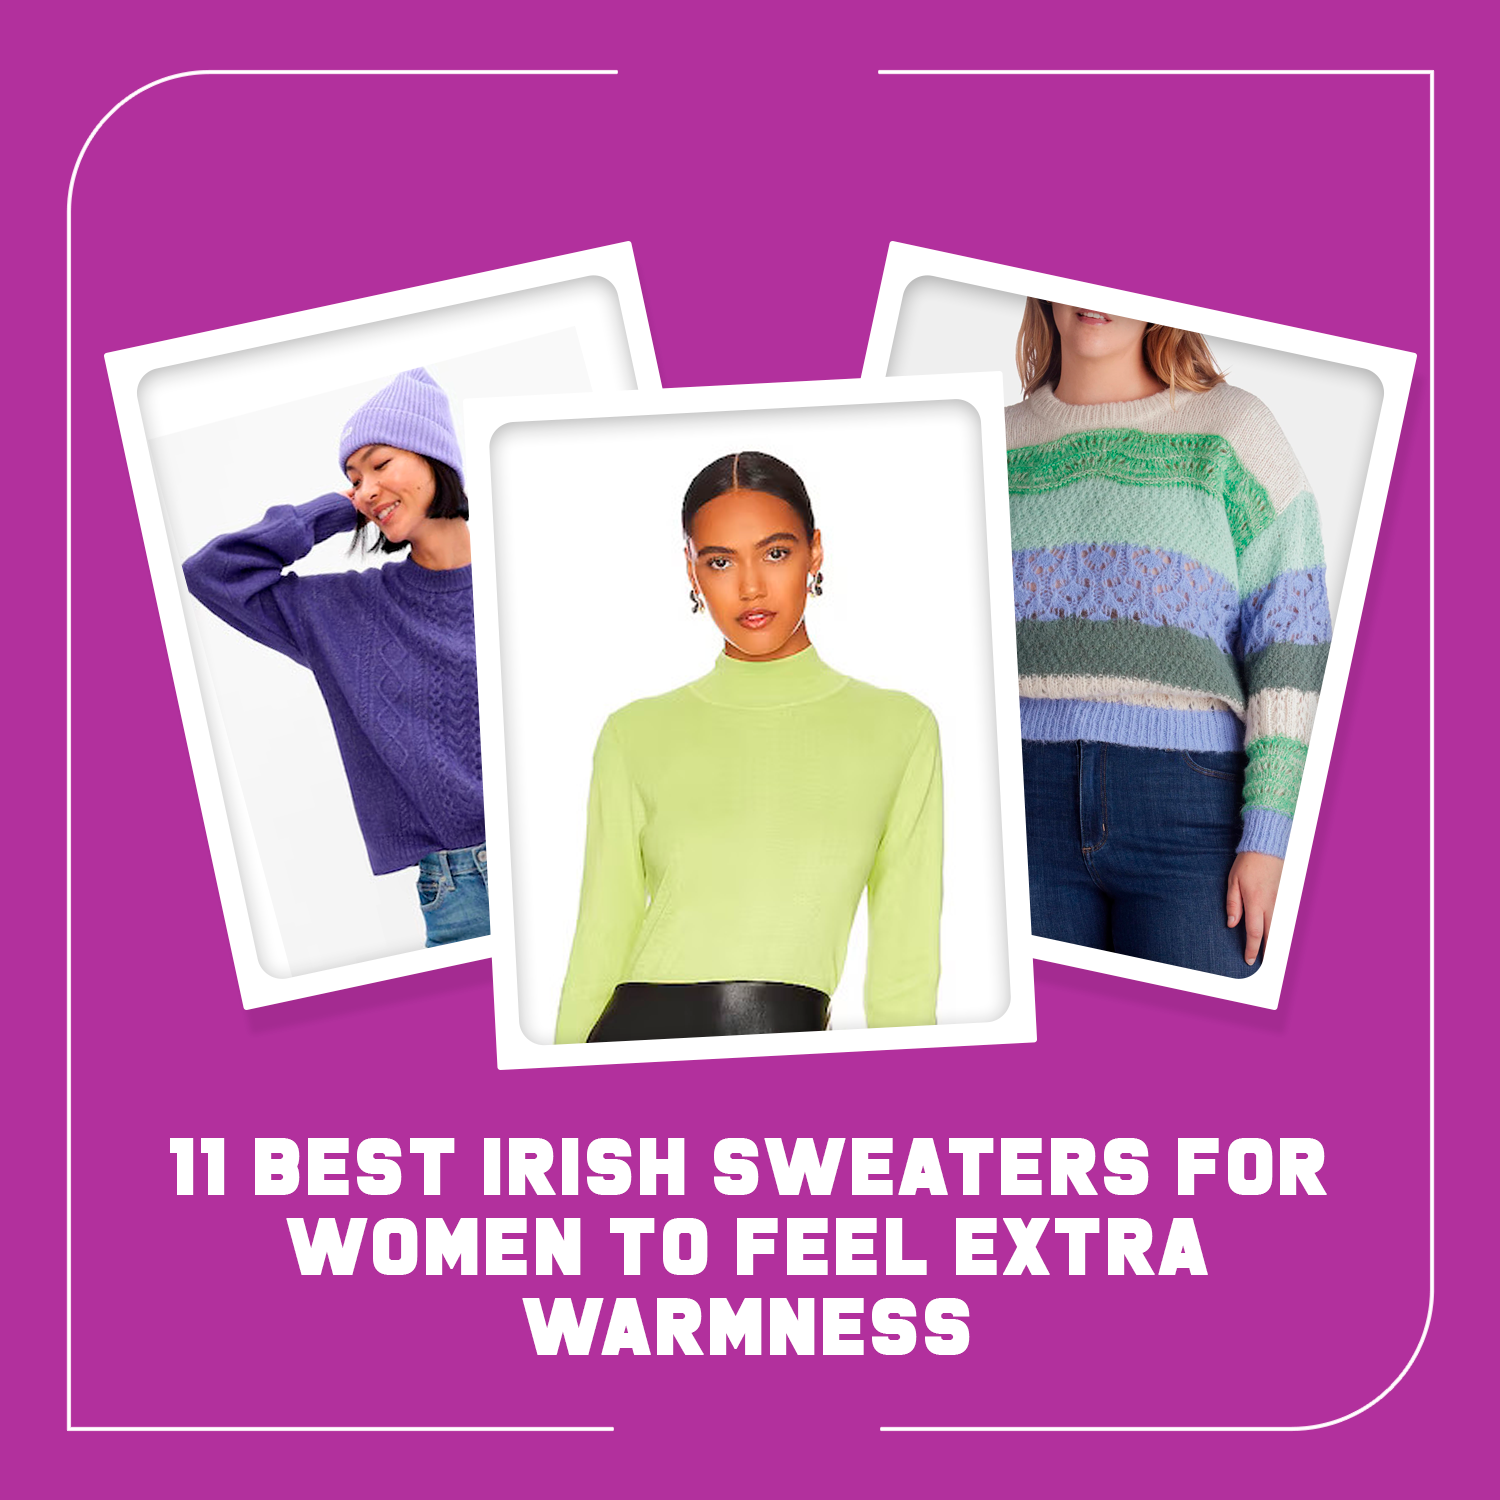 11 Best Irish Sweaters For Women To Feel Extra Warmness